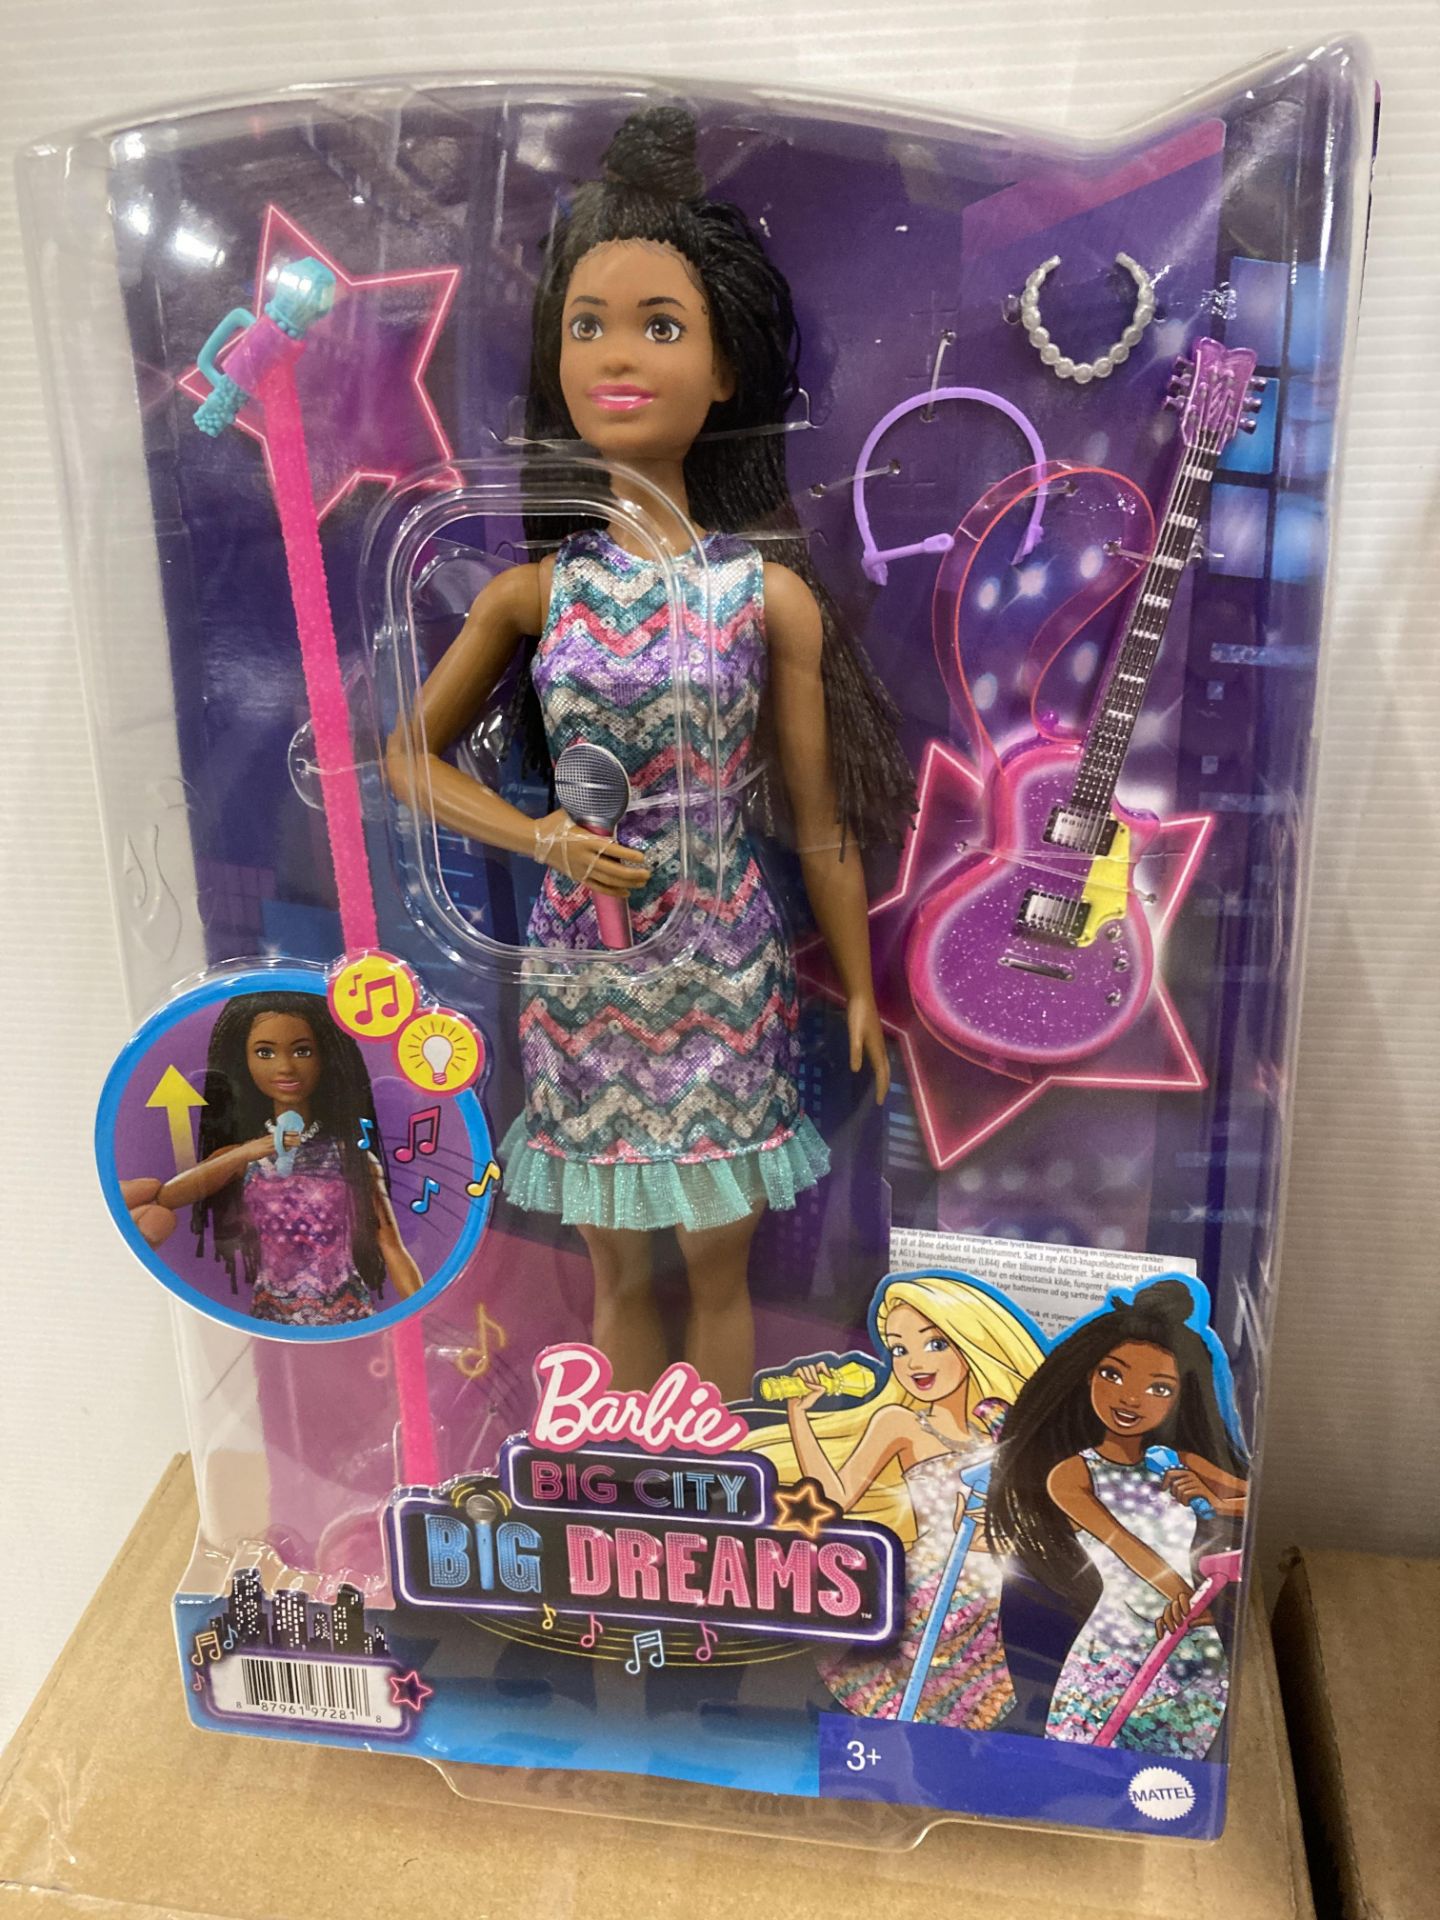 8 x Barbie Big City Dreams doll and accessories (2 x outer boxes) (saleroom location: M08) - Image 2 of 3